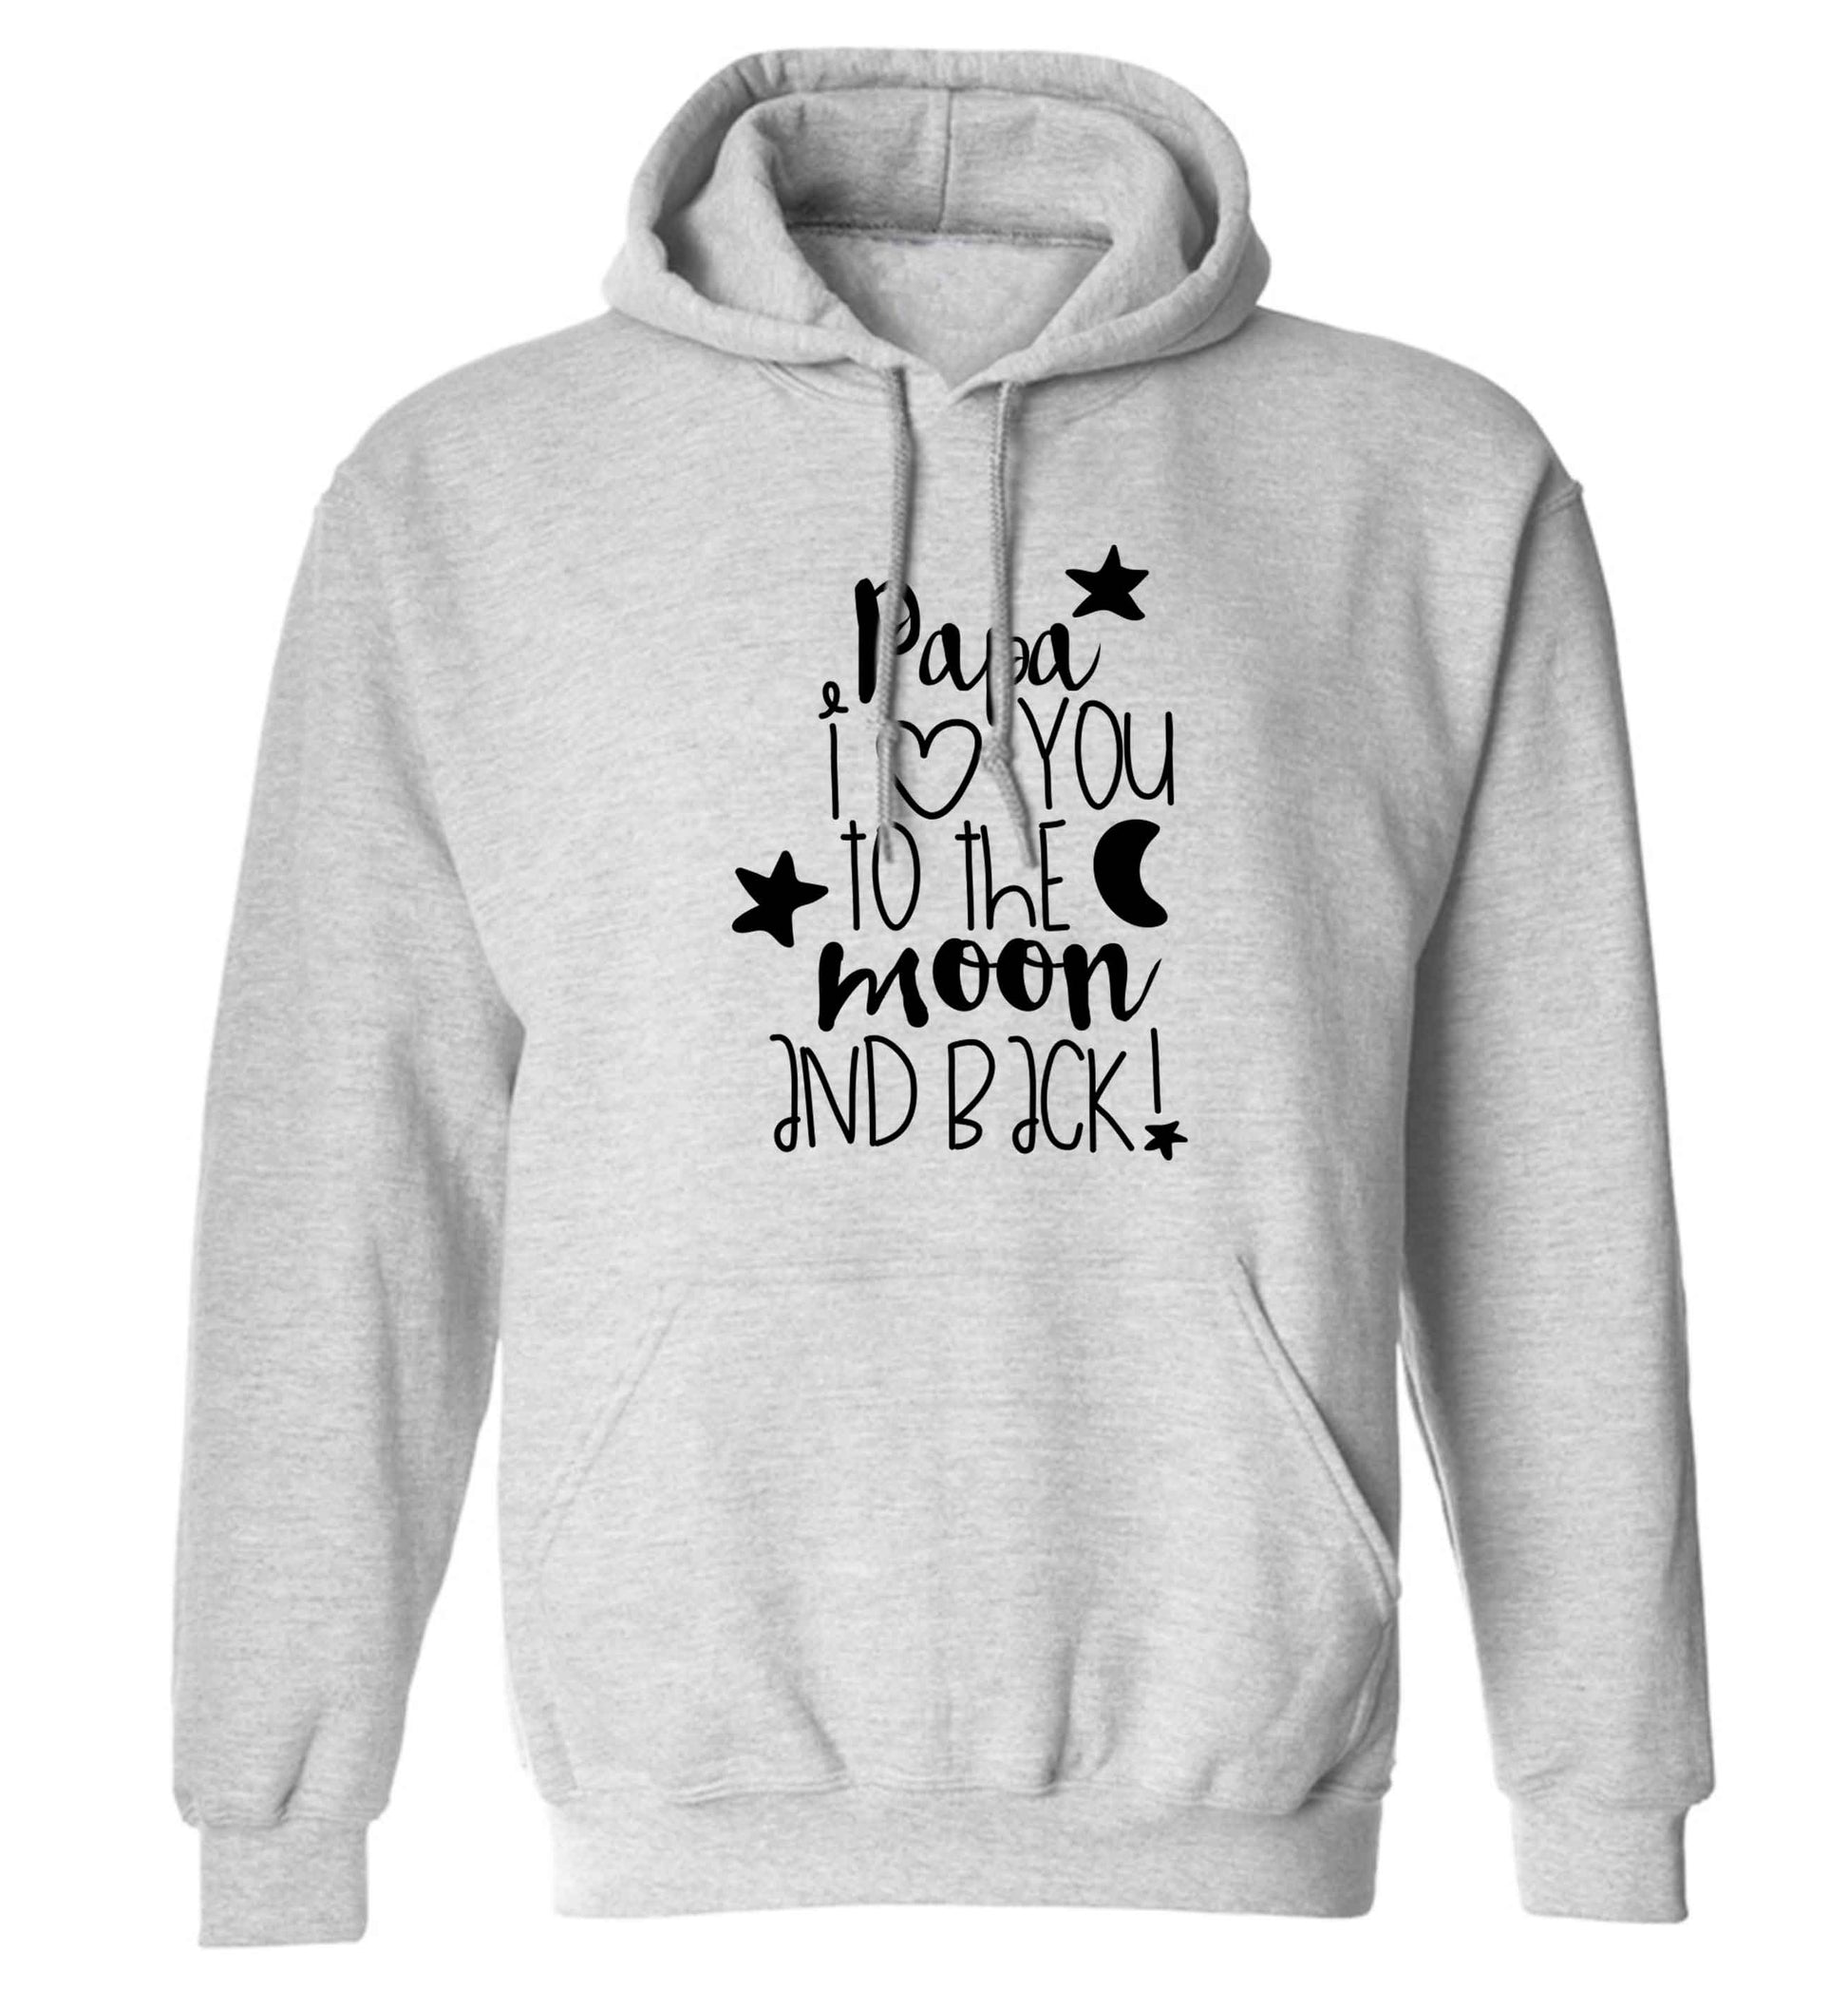 Papa I love you to the moon and back adults unisex grey hoodie 2XL